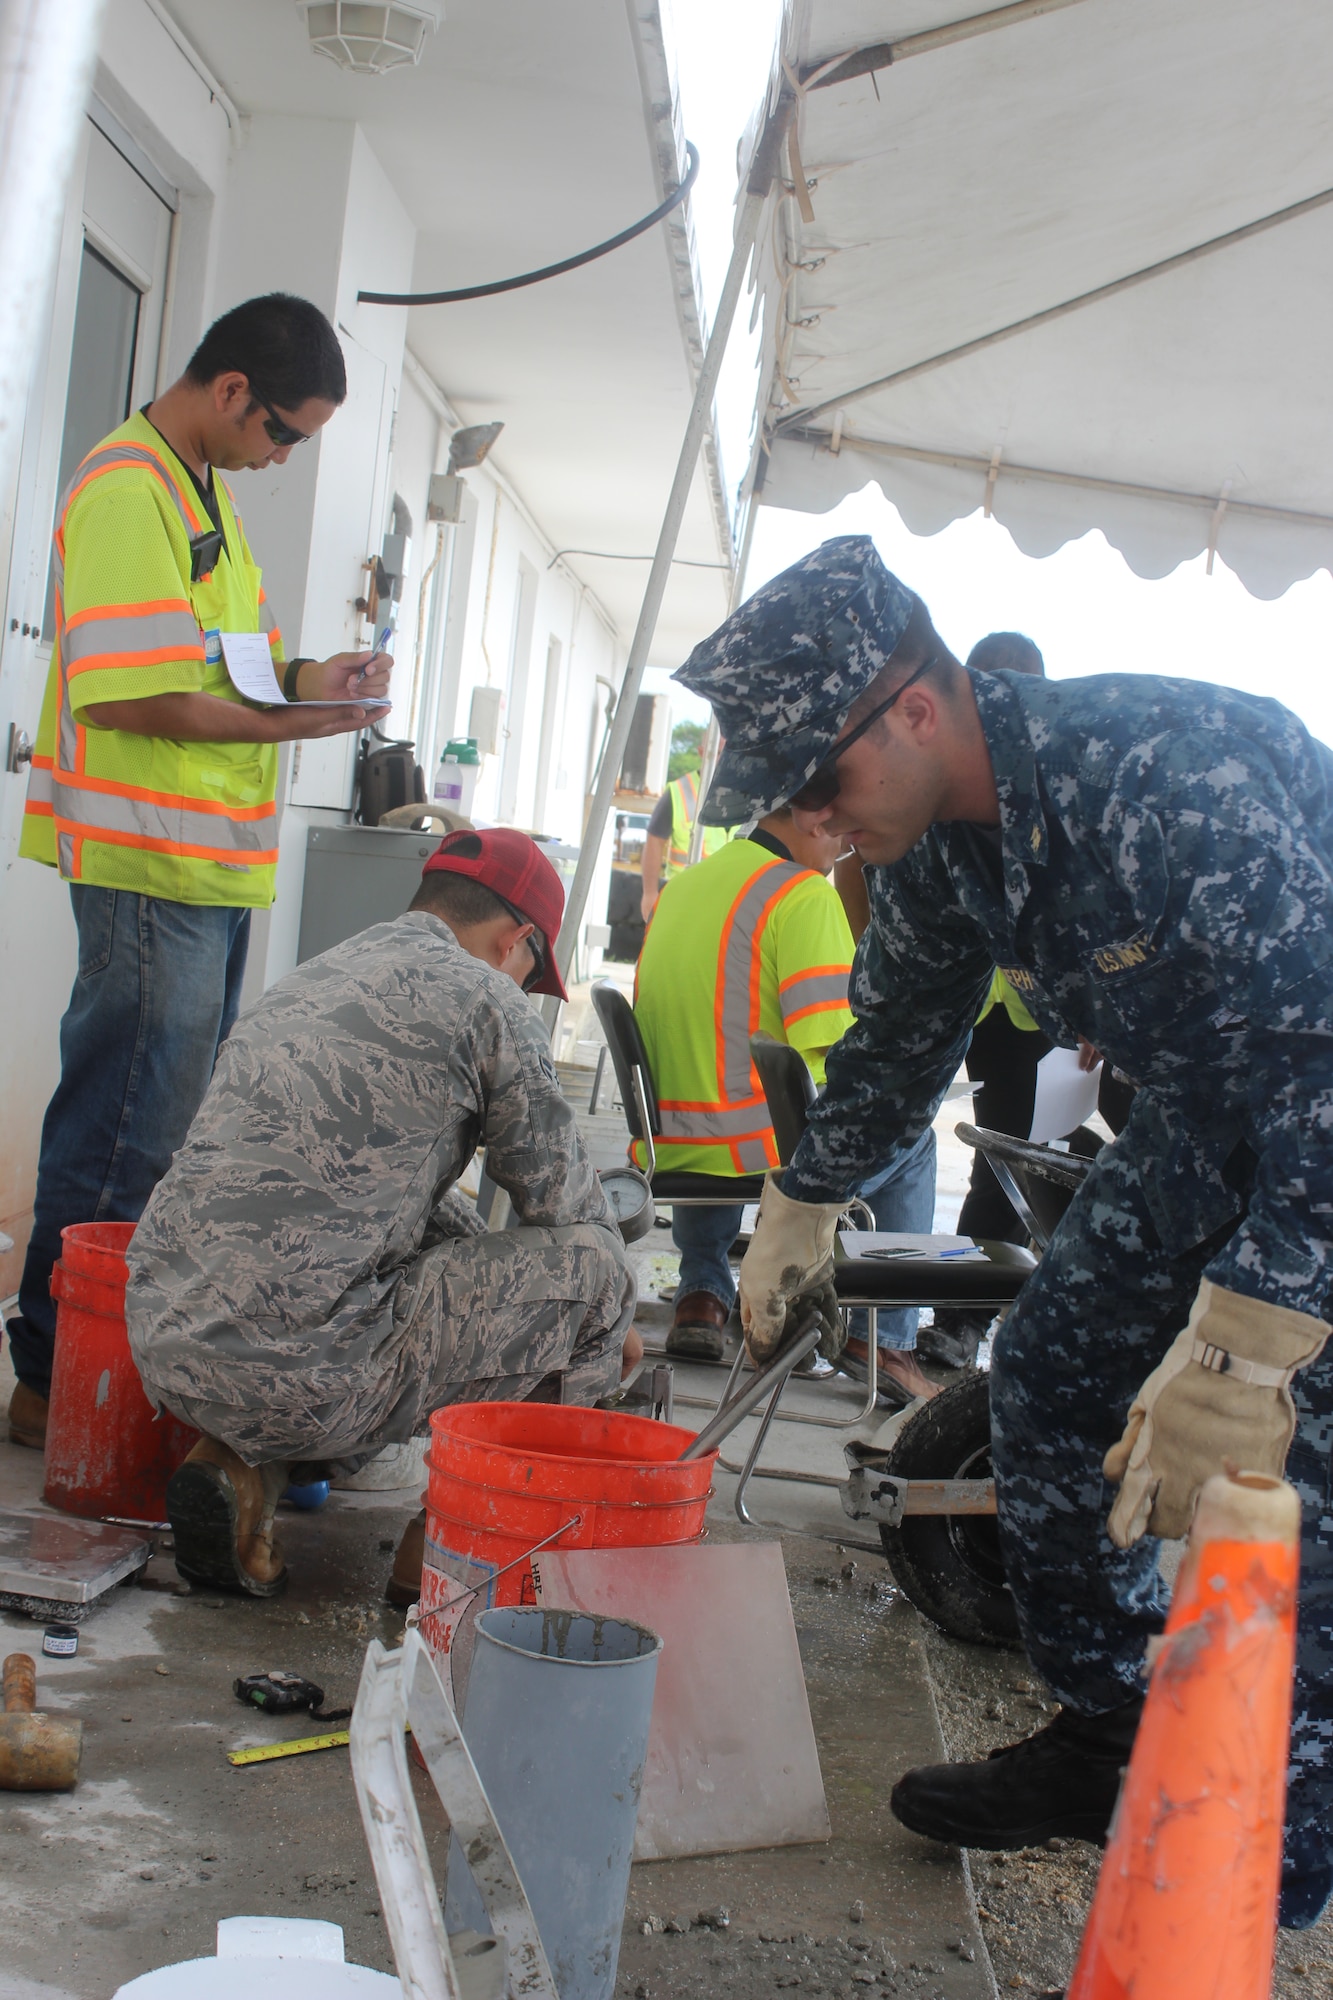 U.S. Navy Lt. j.g. Christopher Joseph tests concrete with Airman 1st Class Manuel Jimenez during a training course Dec. 11, 2014, in Mangilao, Guam. Military members and civilians recently completed a series of two-day courses to learn concrete field testing processes and procedures. Joseph is a Naval Base Guam assistant production officer and Jimenez is a 554th RED HORSE Squadron engineer assistant. (U.S. Air Force photo/Capt. Naseem Ghandour)